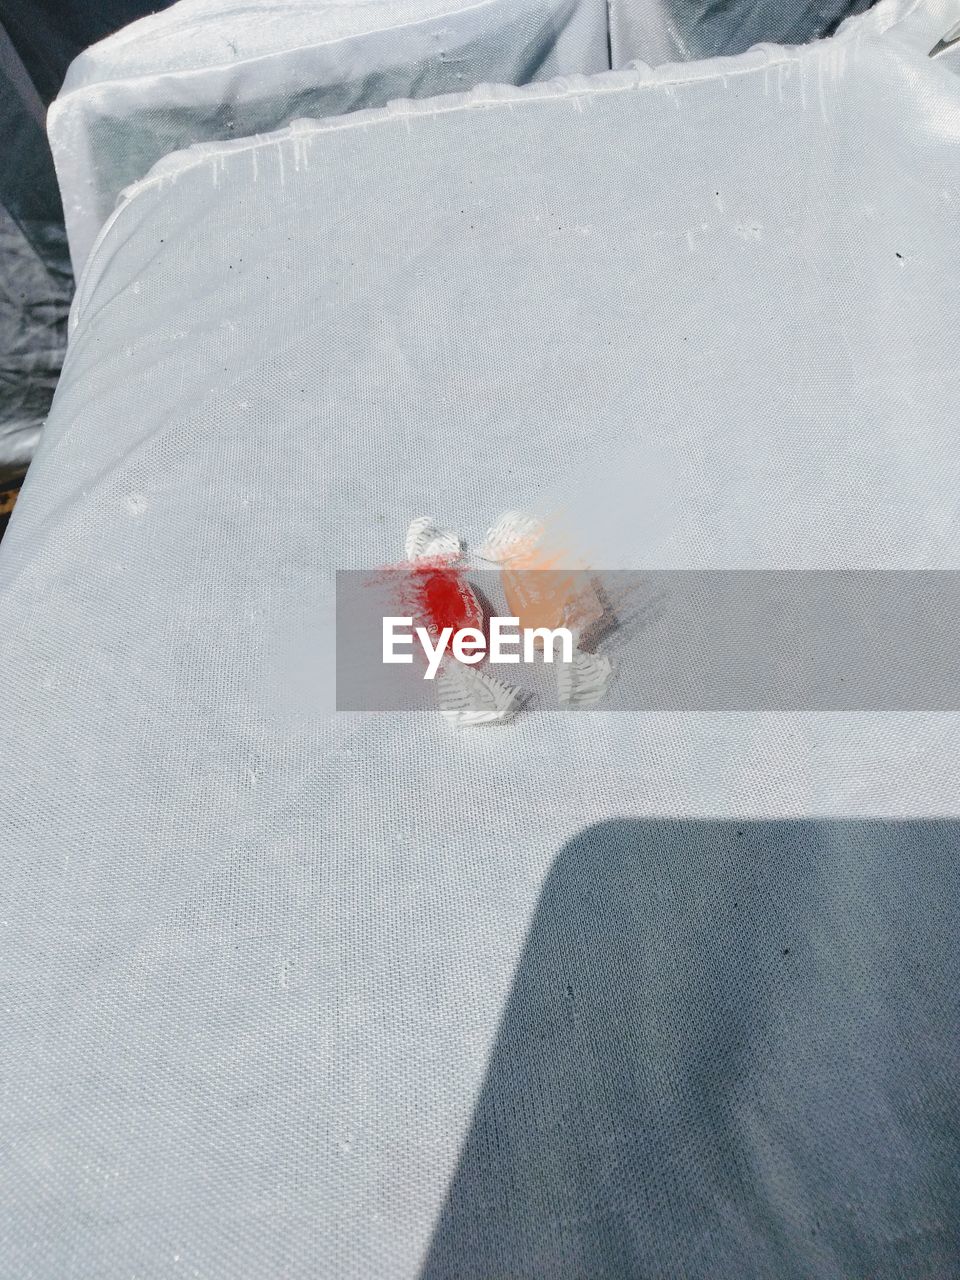 HIGH ANGLE VIEW OF ICE CREAM ON FROZEN WATER